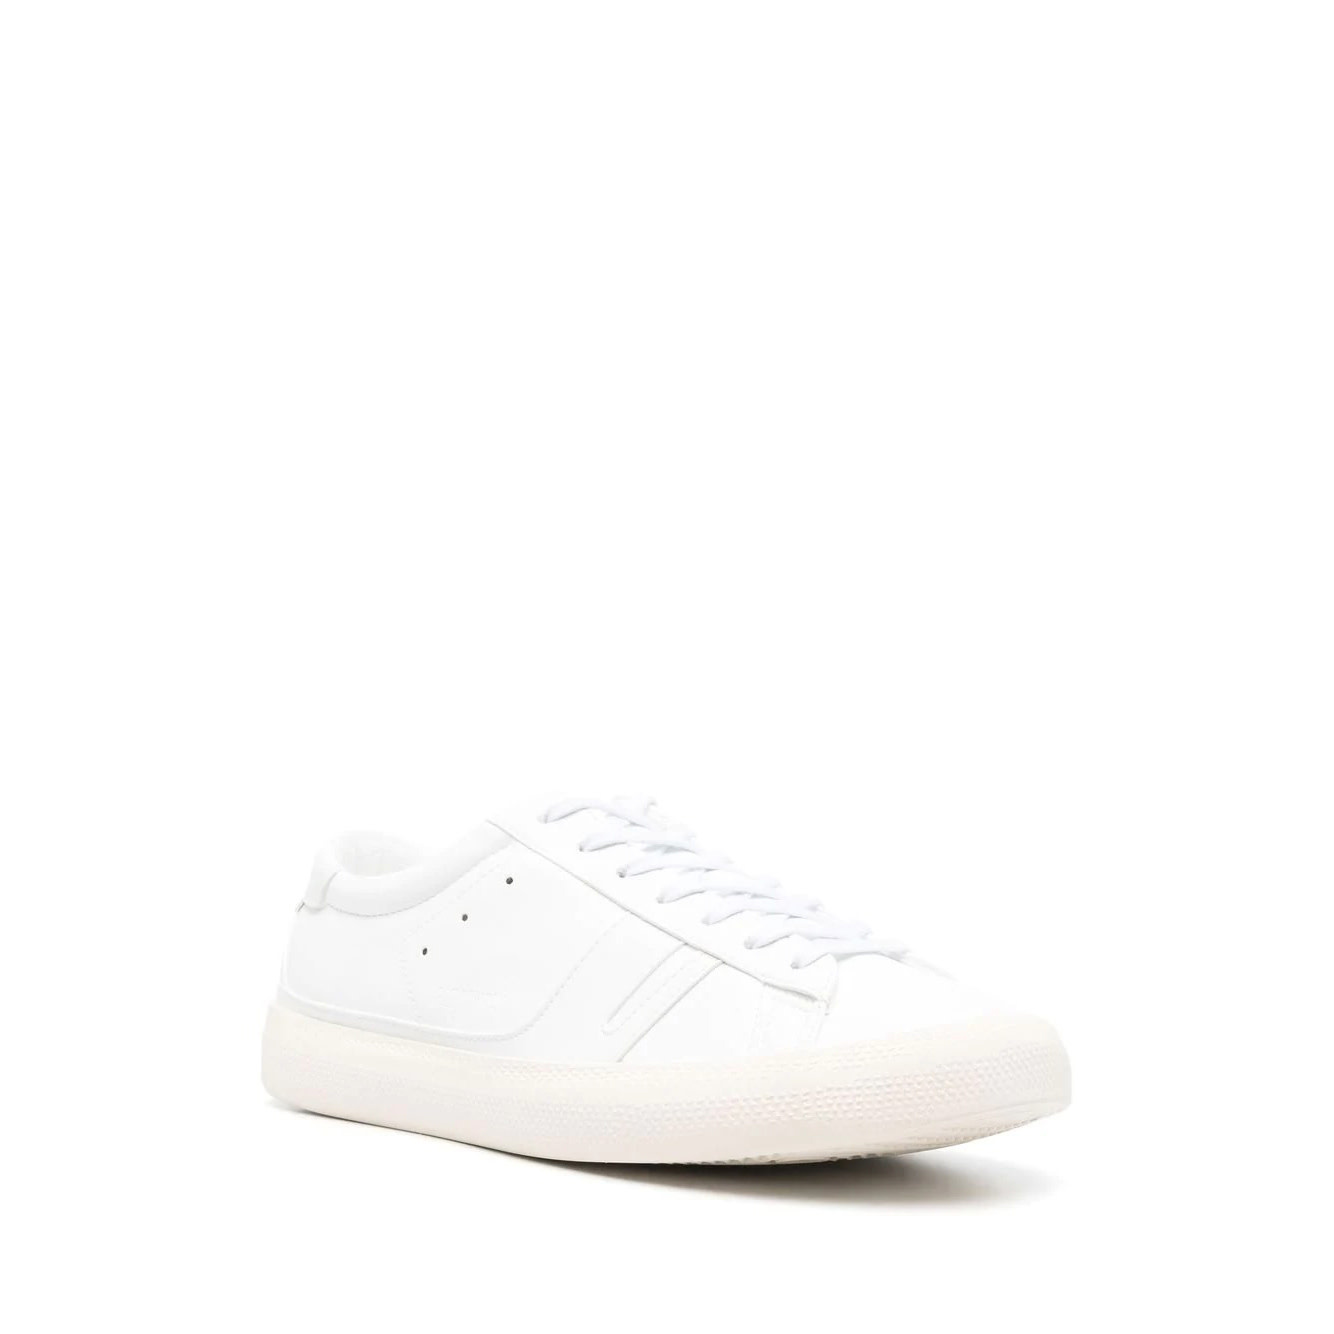 Yatay | Shoes | Yatay Womens White Sneakers Neven Trainers Made In Italy  Vegan Worn Once | Poshmark